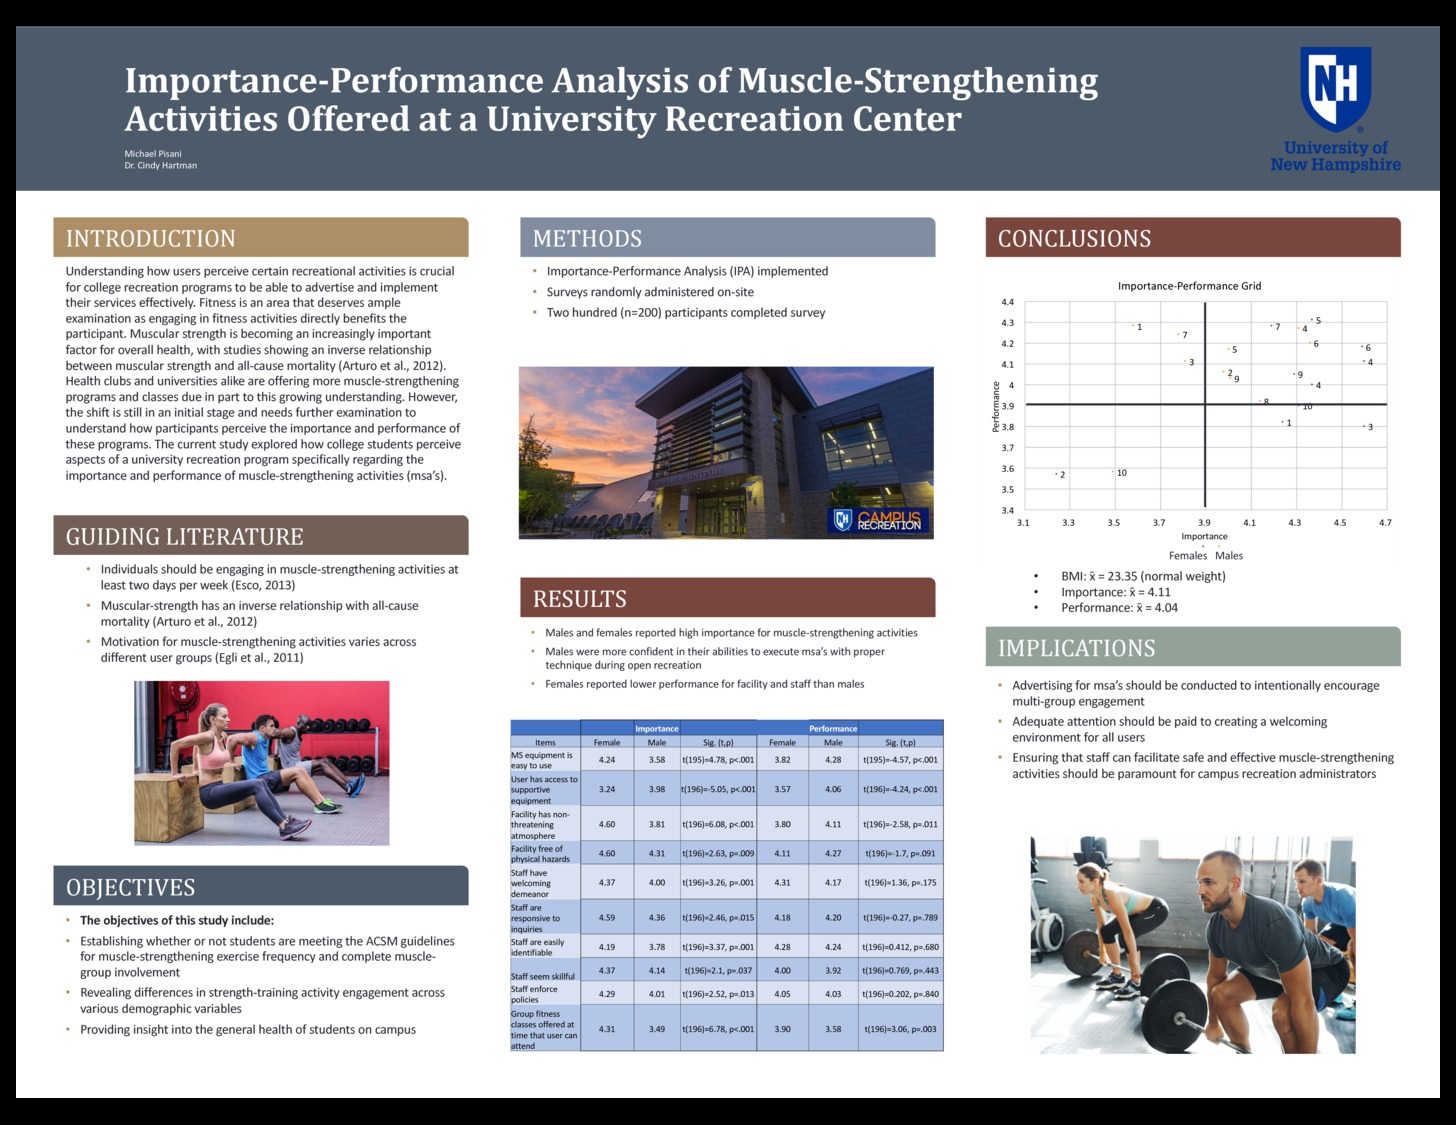 Importance-Performance Analysis Of Muscle-Strengthening Activities Offered At A University Recreation Center by mvp1006